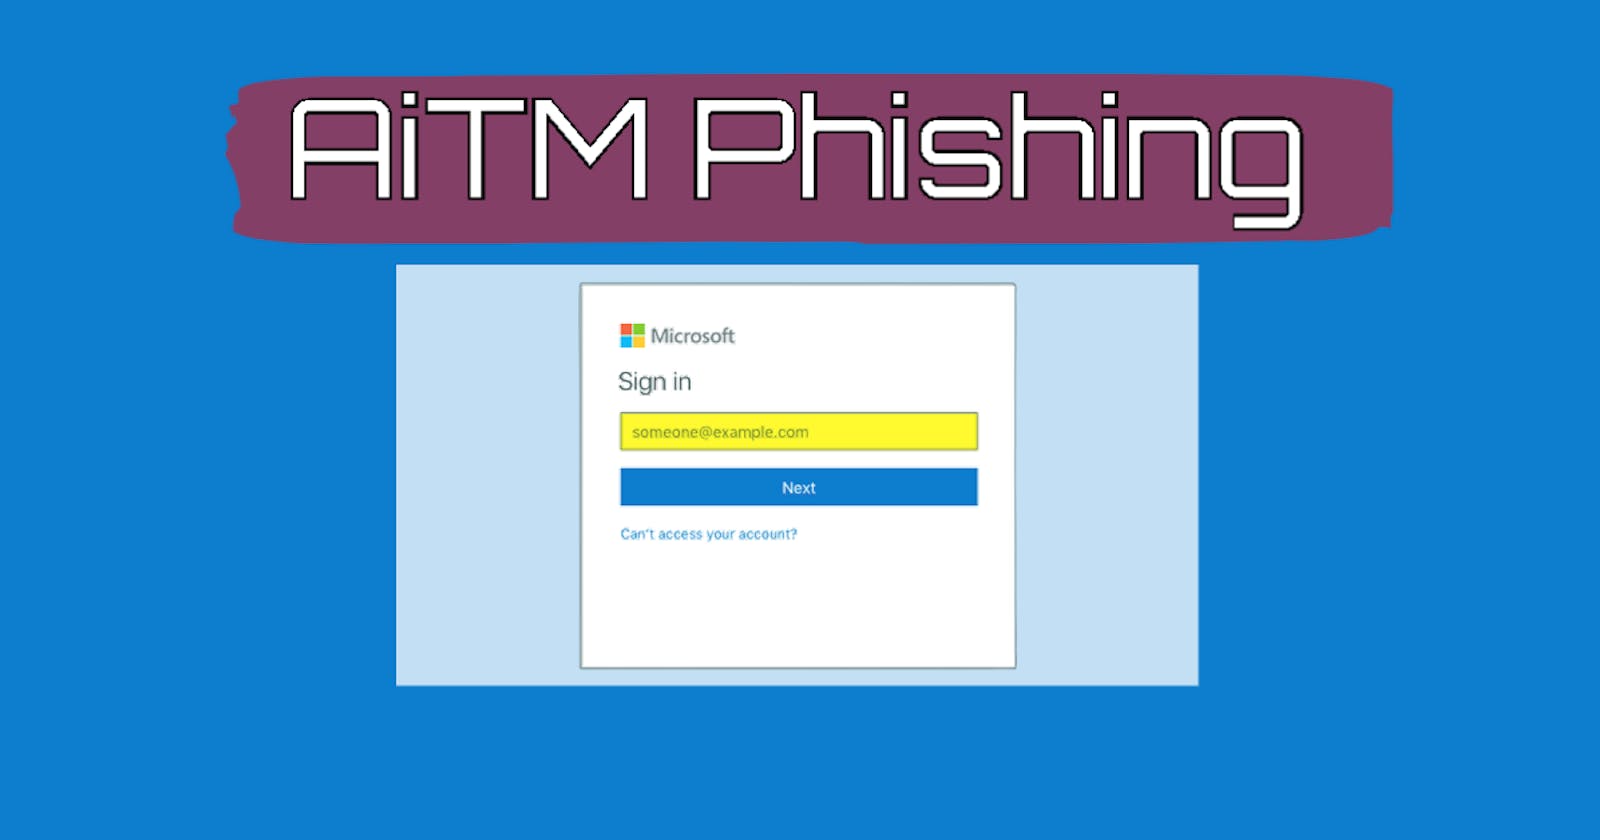 Open-Source Adversary-in-the-Middle Phishing Kit Gaining Popularity among Cybercriminals